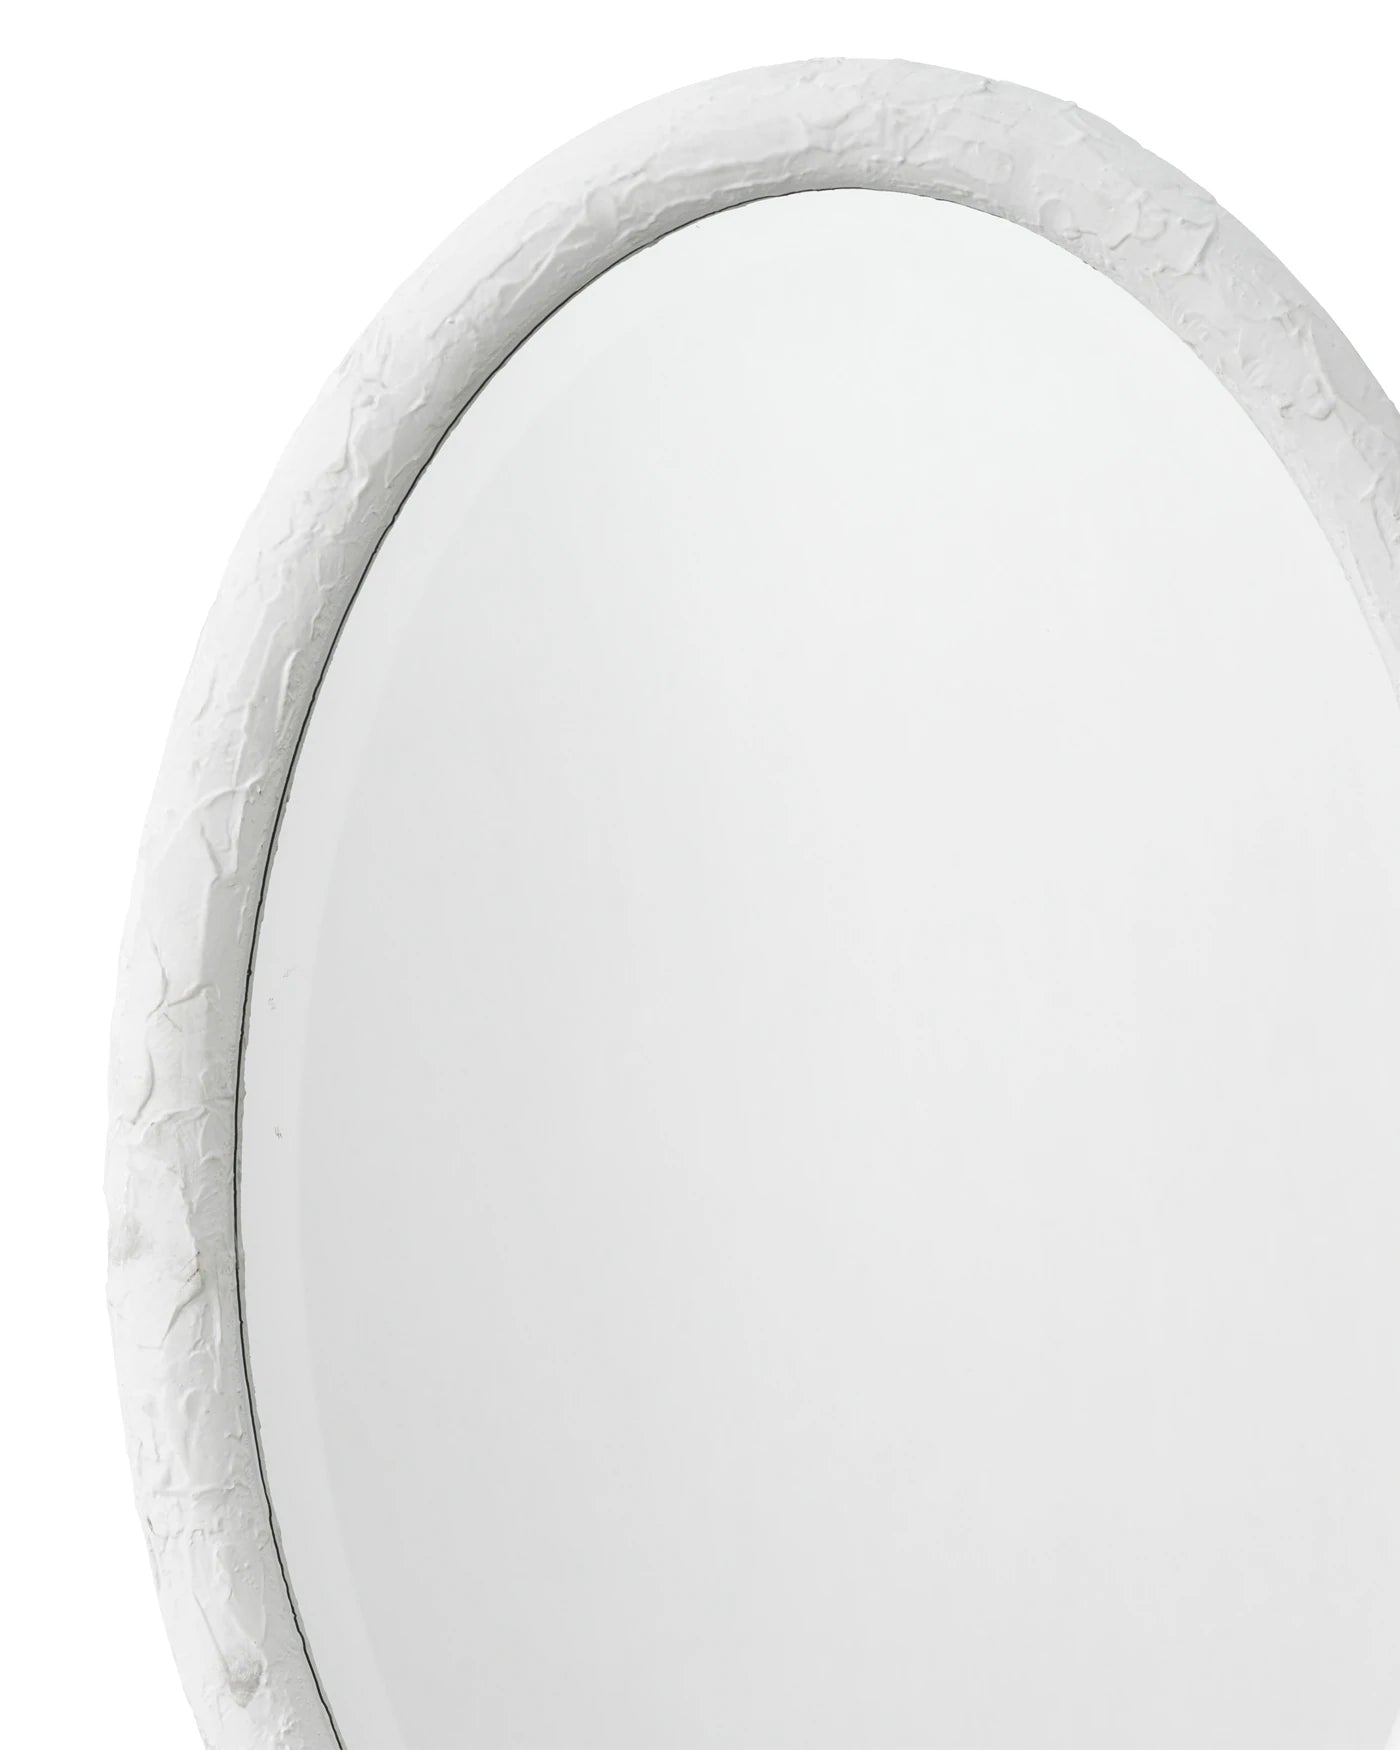 jamie young ovation oval white mirror detail